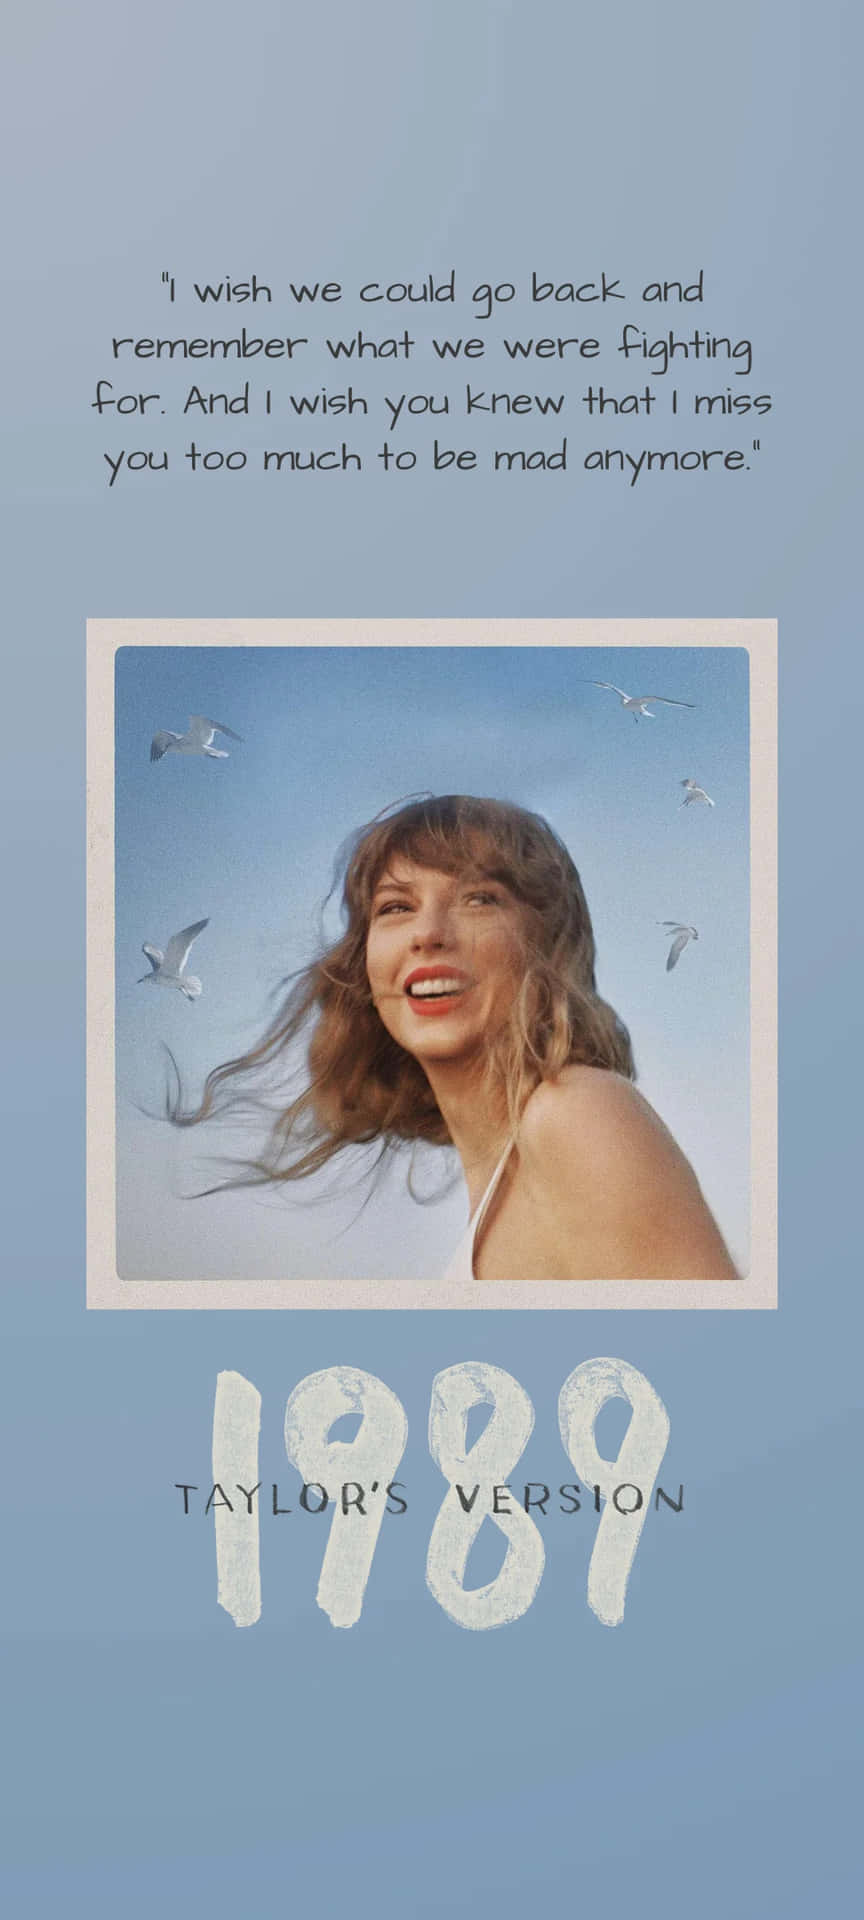 1989 Taylors Version Promotional Poster Wallpaper